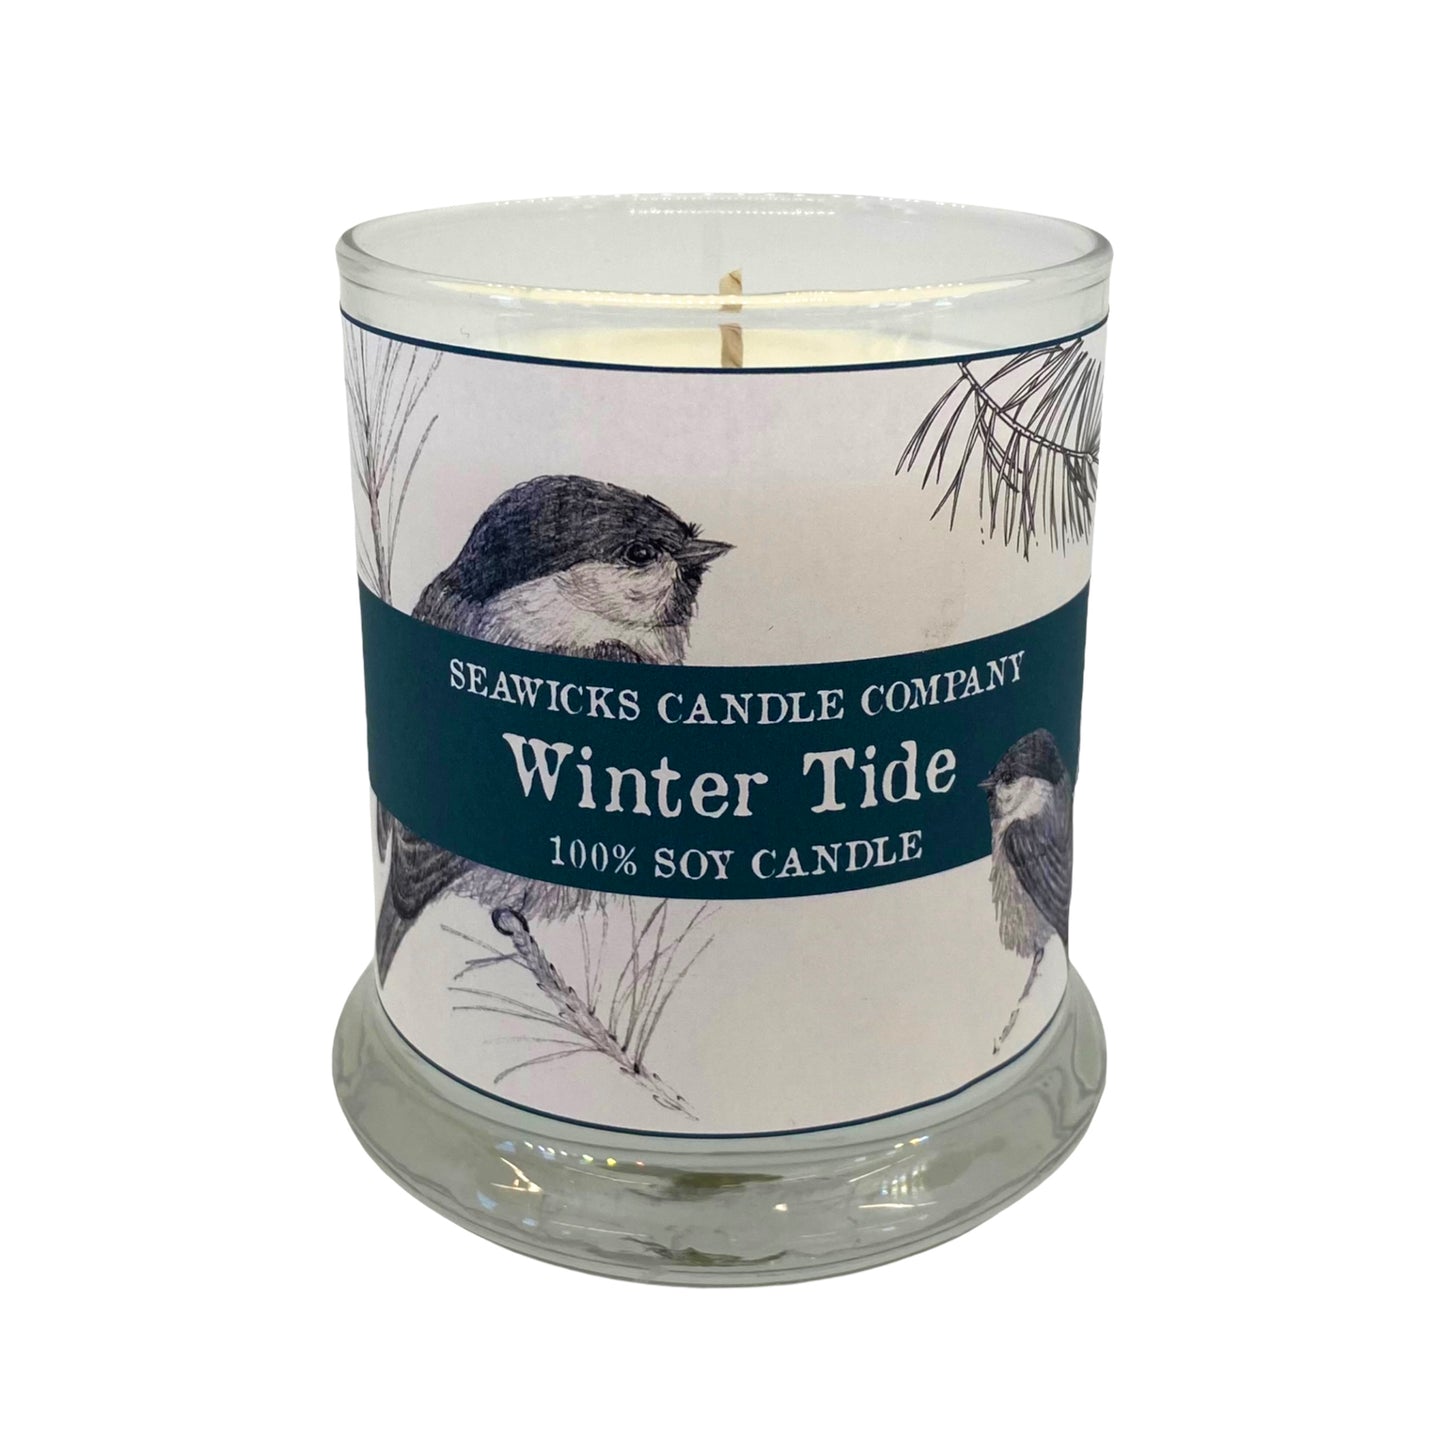 Winter Tide 100% Soy Candle